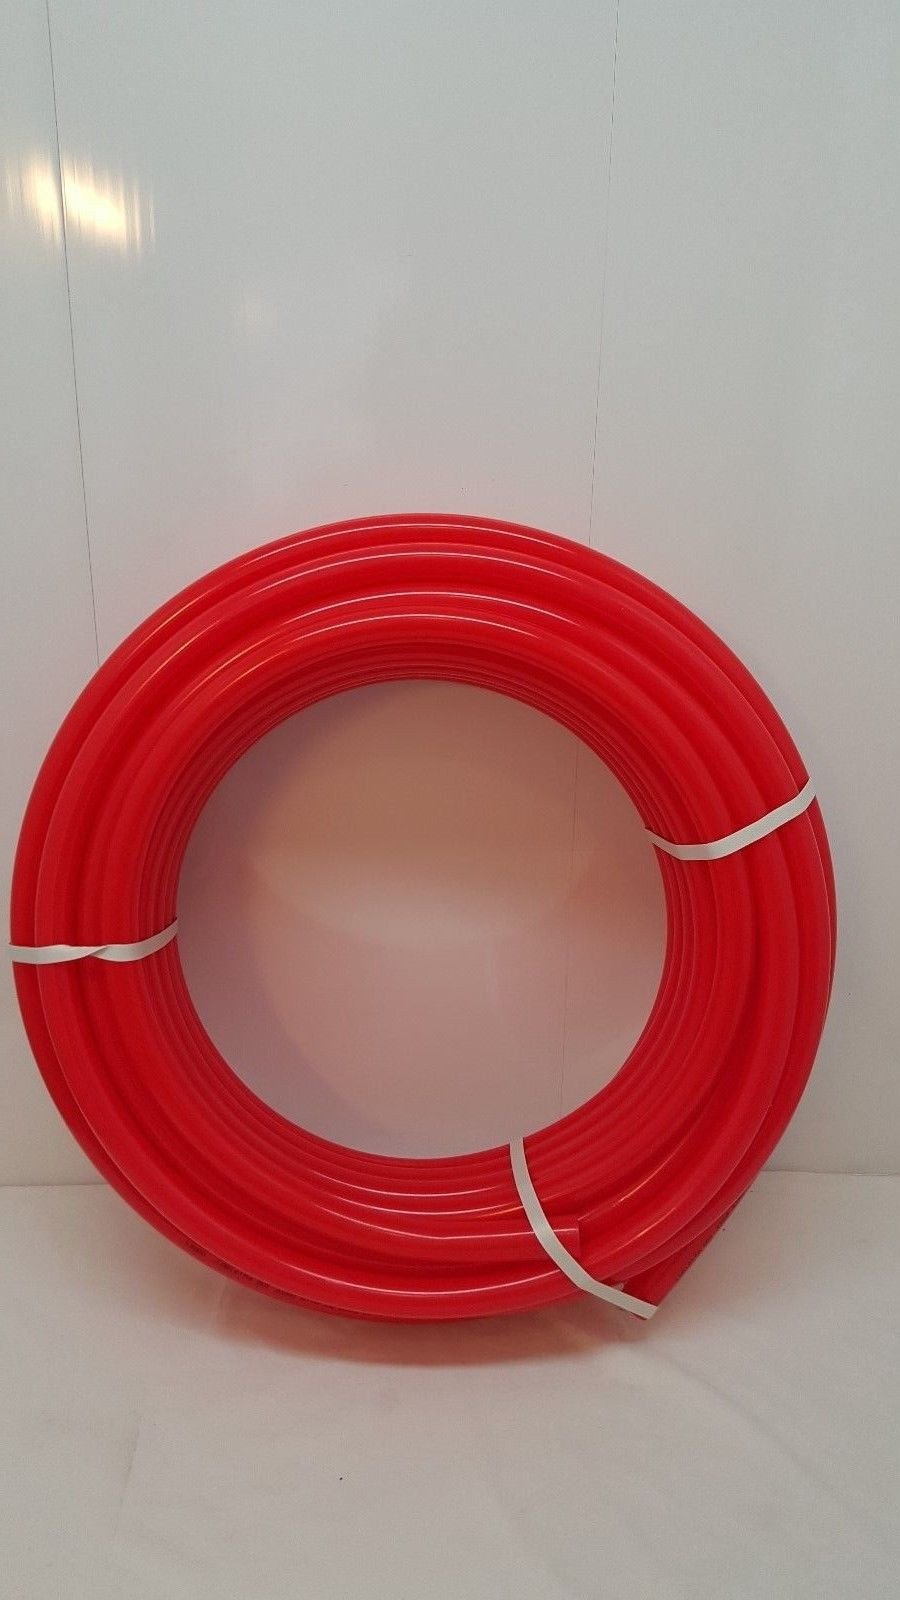 1 1/4" Non Oxygen Barrier Red PEX Tubing for heating and plumbing